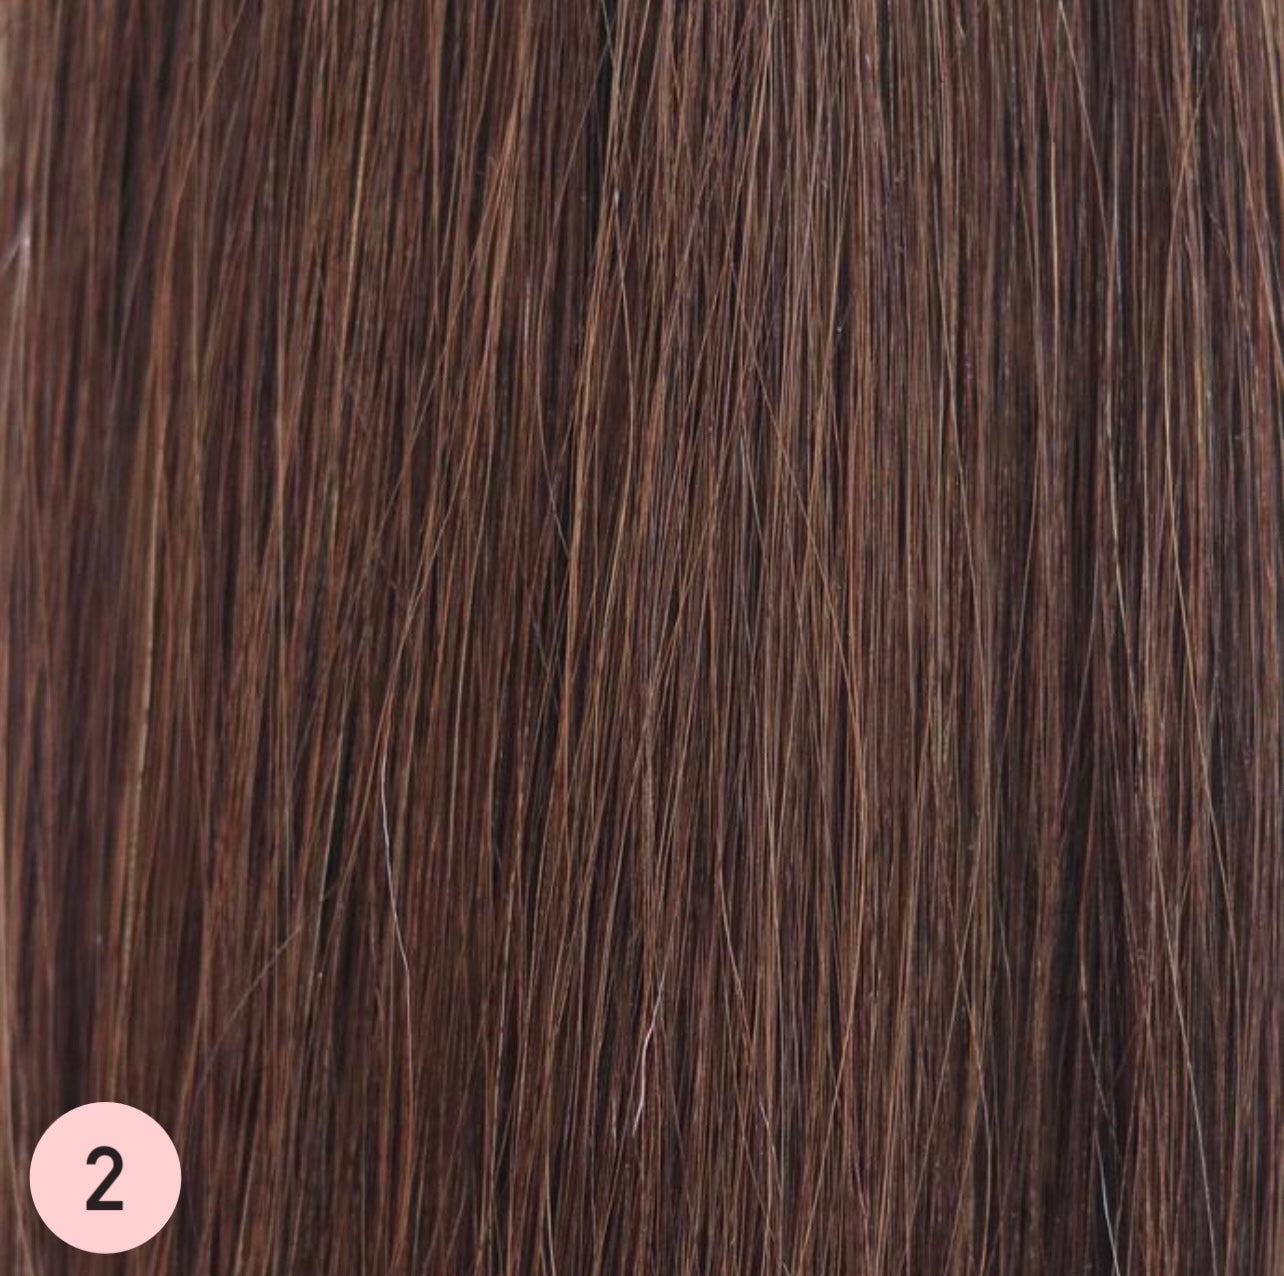 24" CHOCOLATE BROWN Russian Hair Tape Extensions 20pc